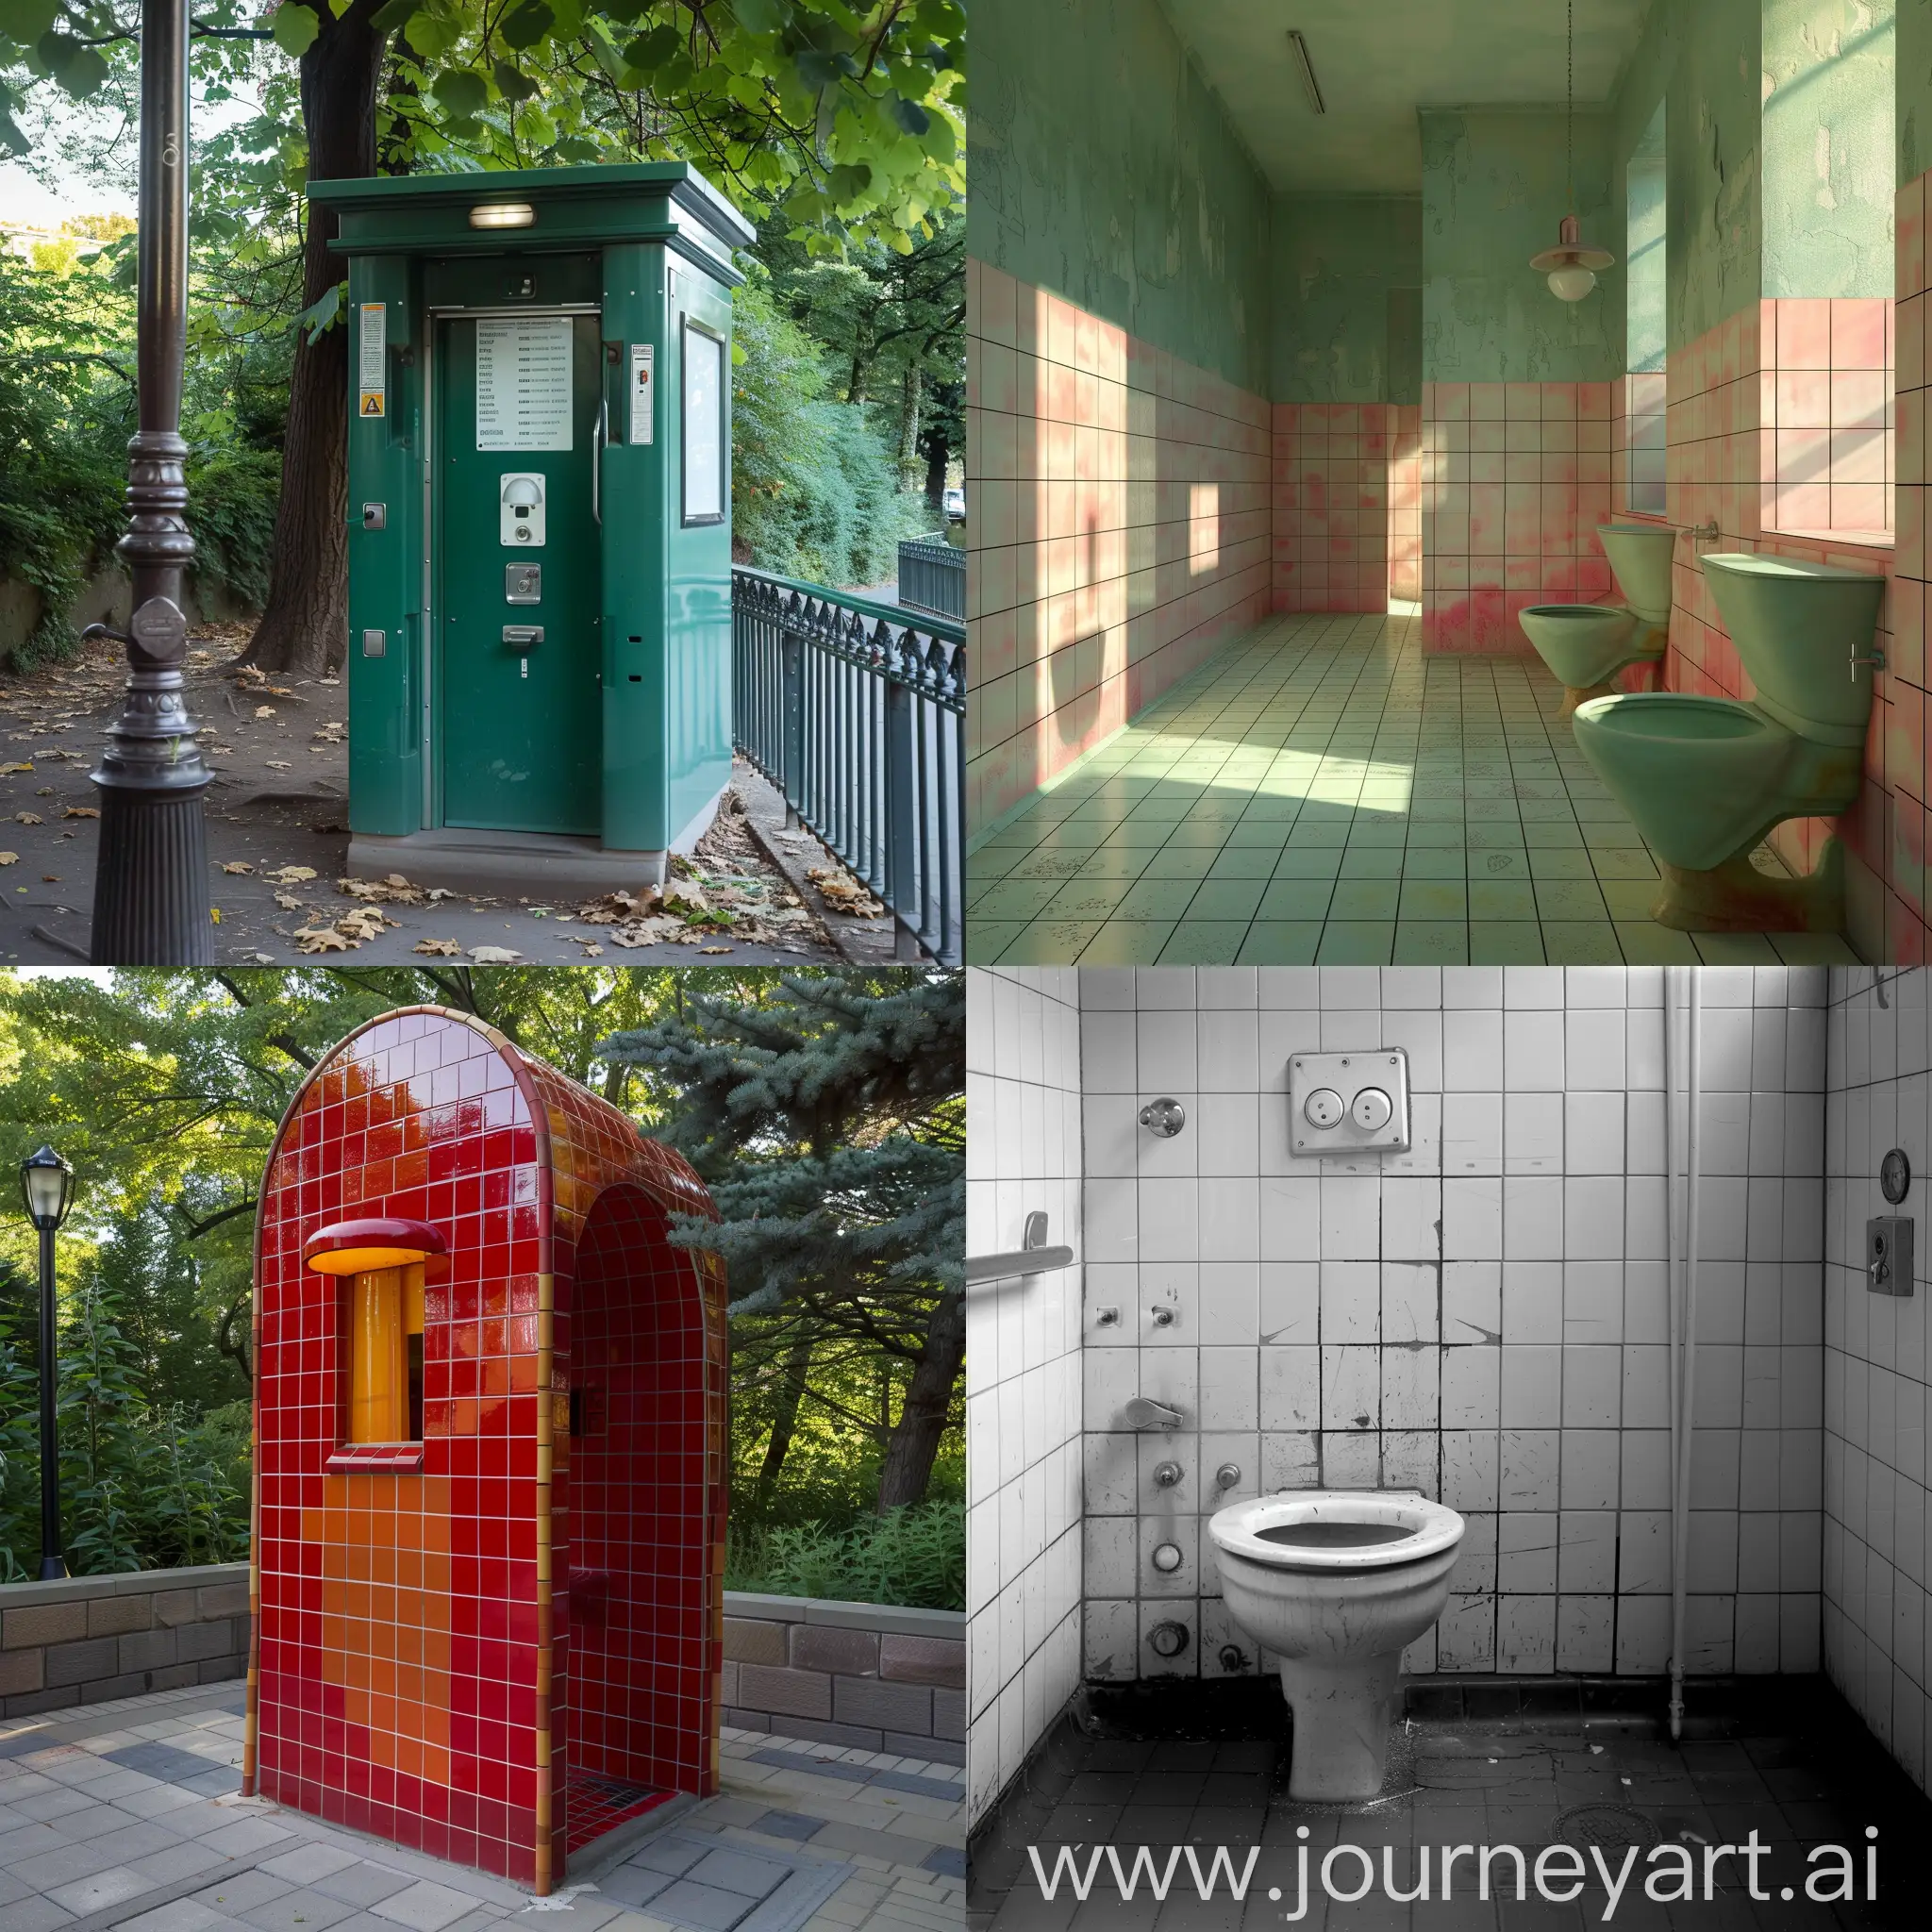 Modern-Public-Toilet-Interior-Design-with-Multiple-Stalls-and-Automated-Fixtures